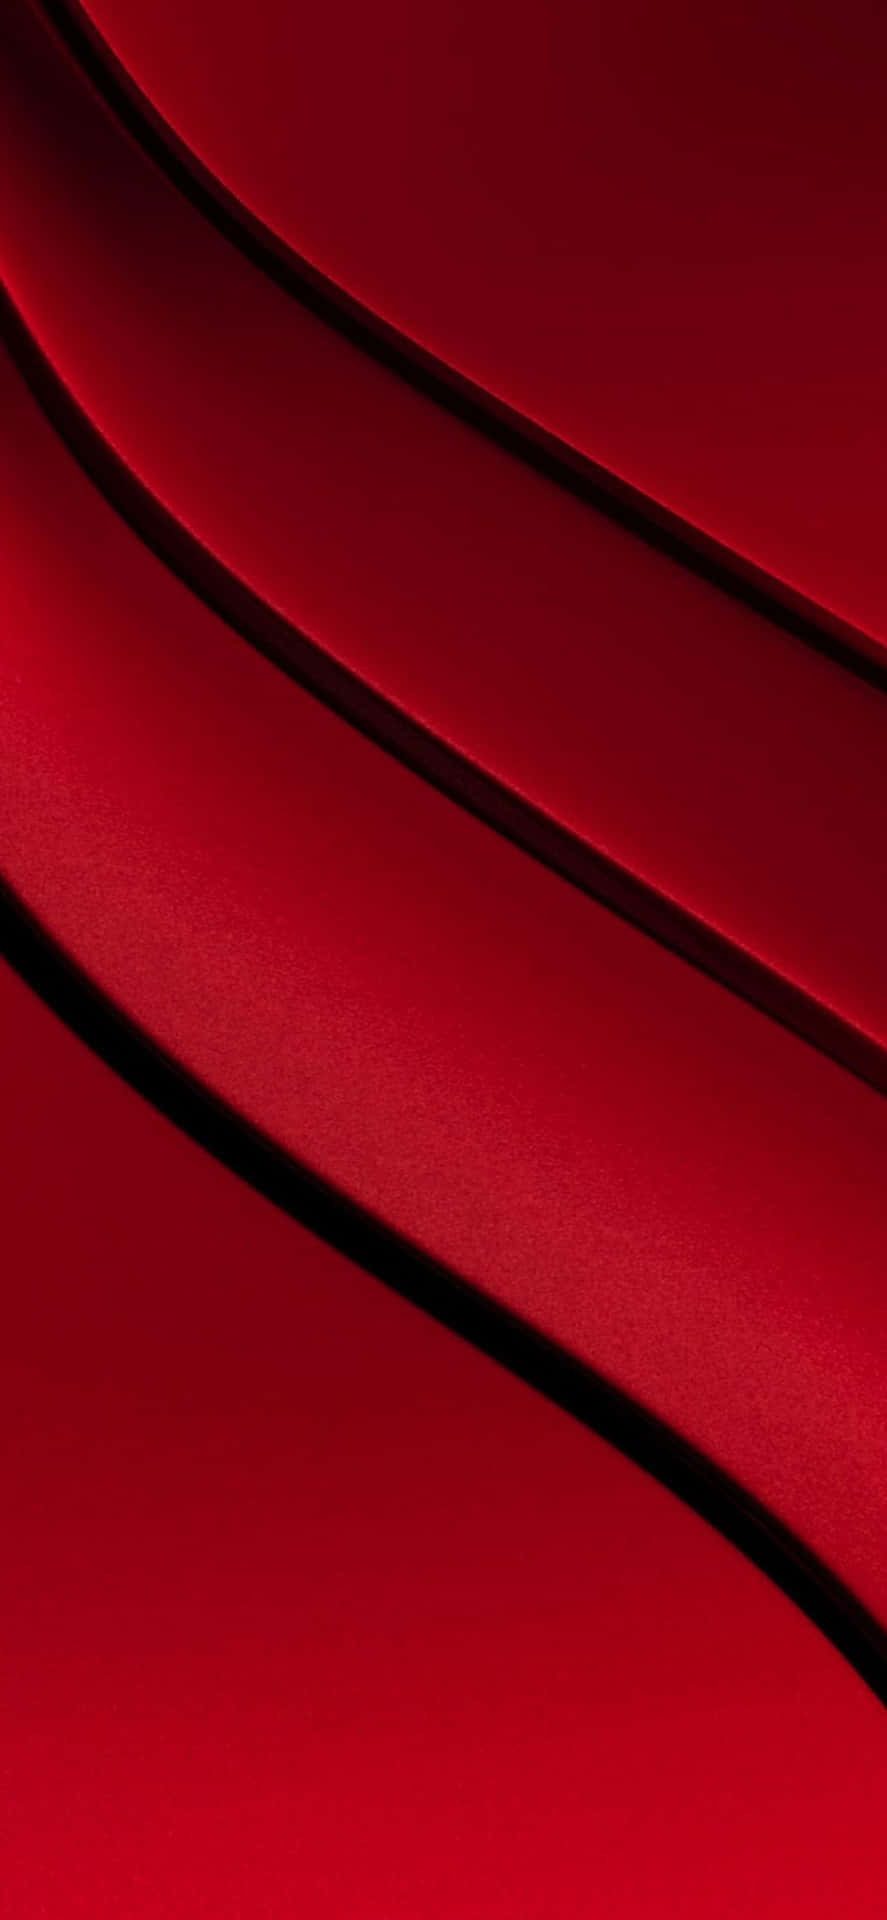 A Red Background With A Curved Shape